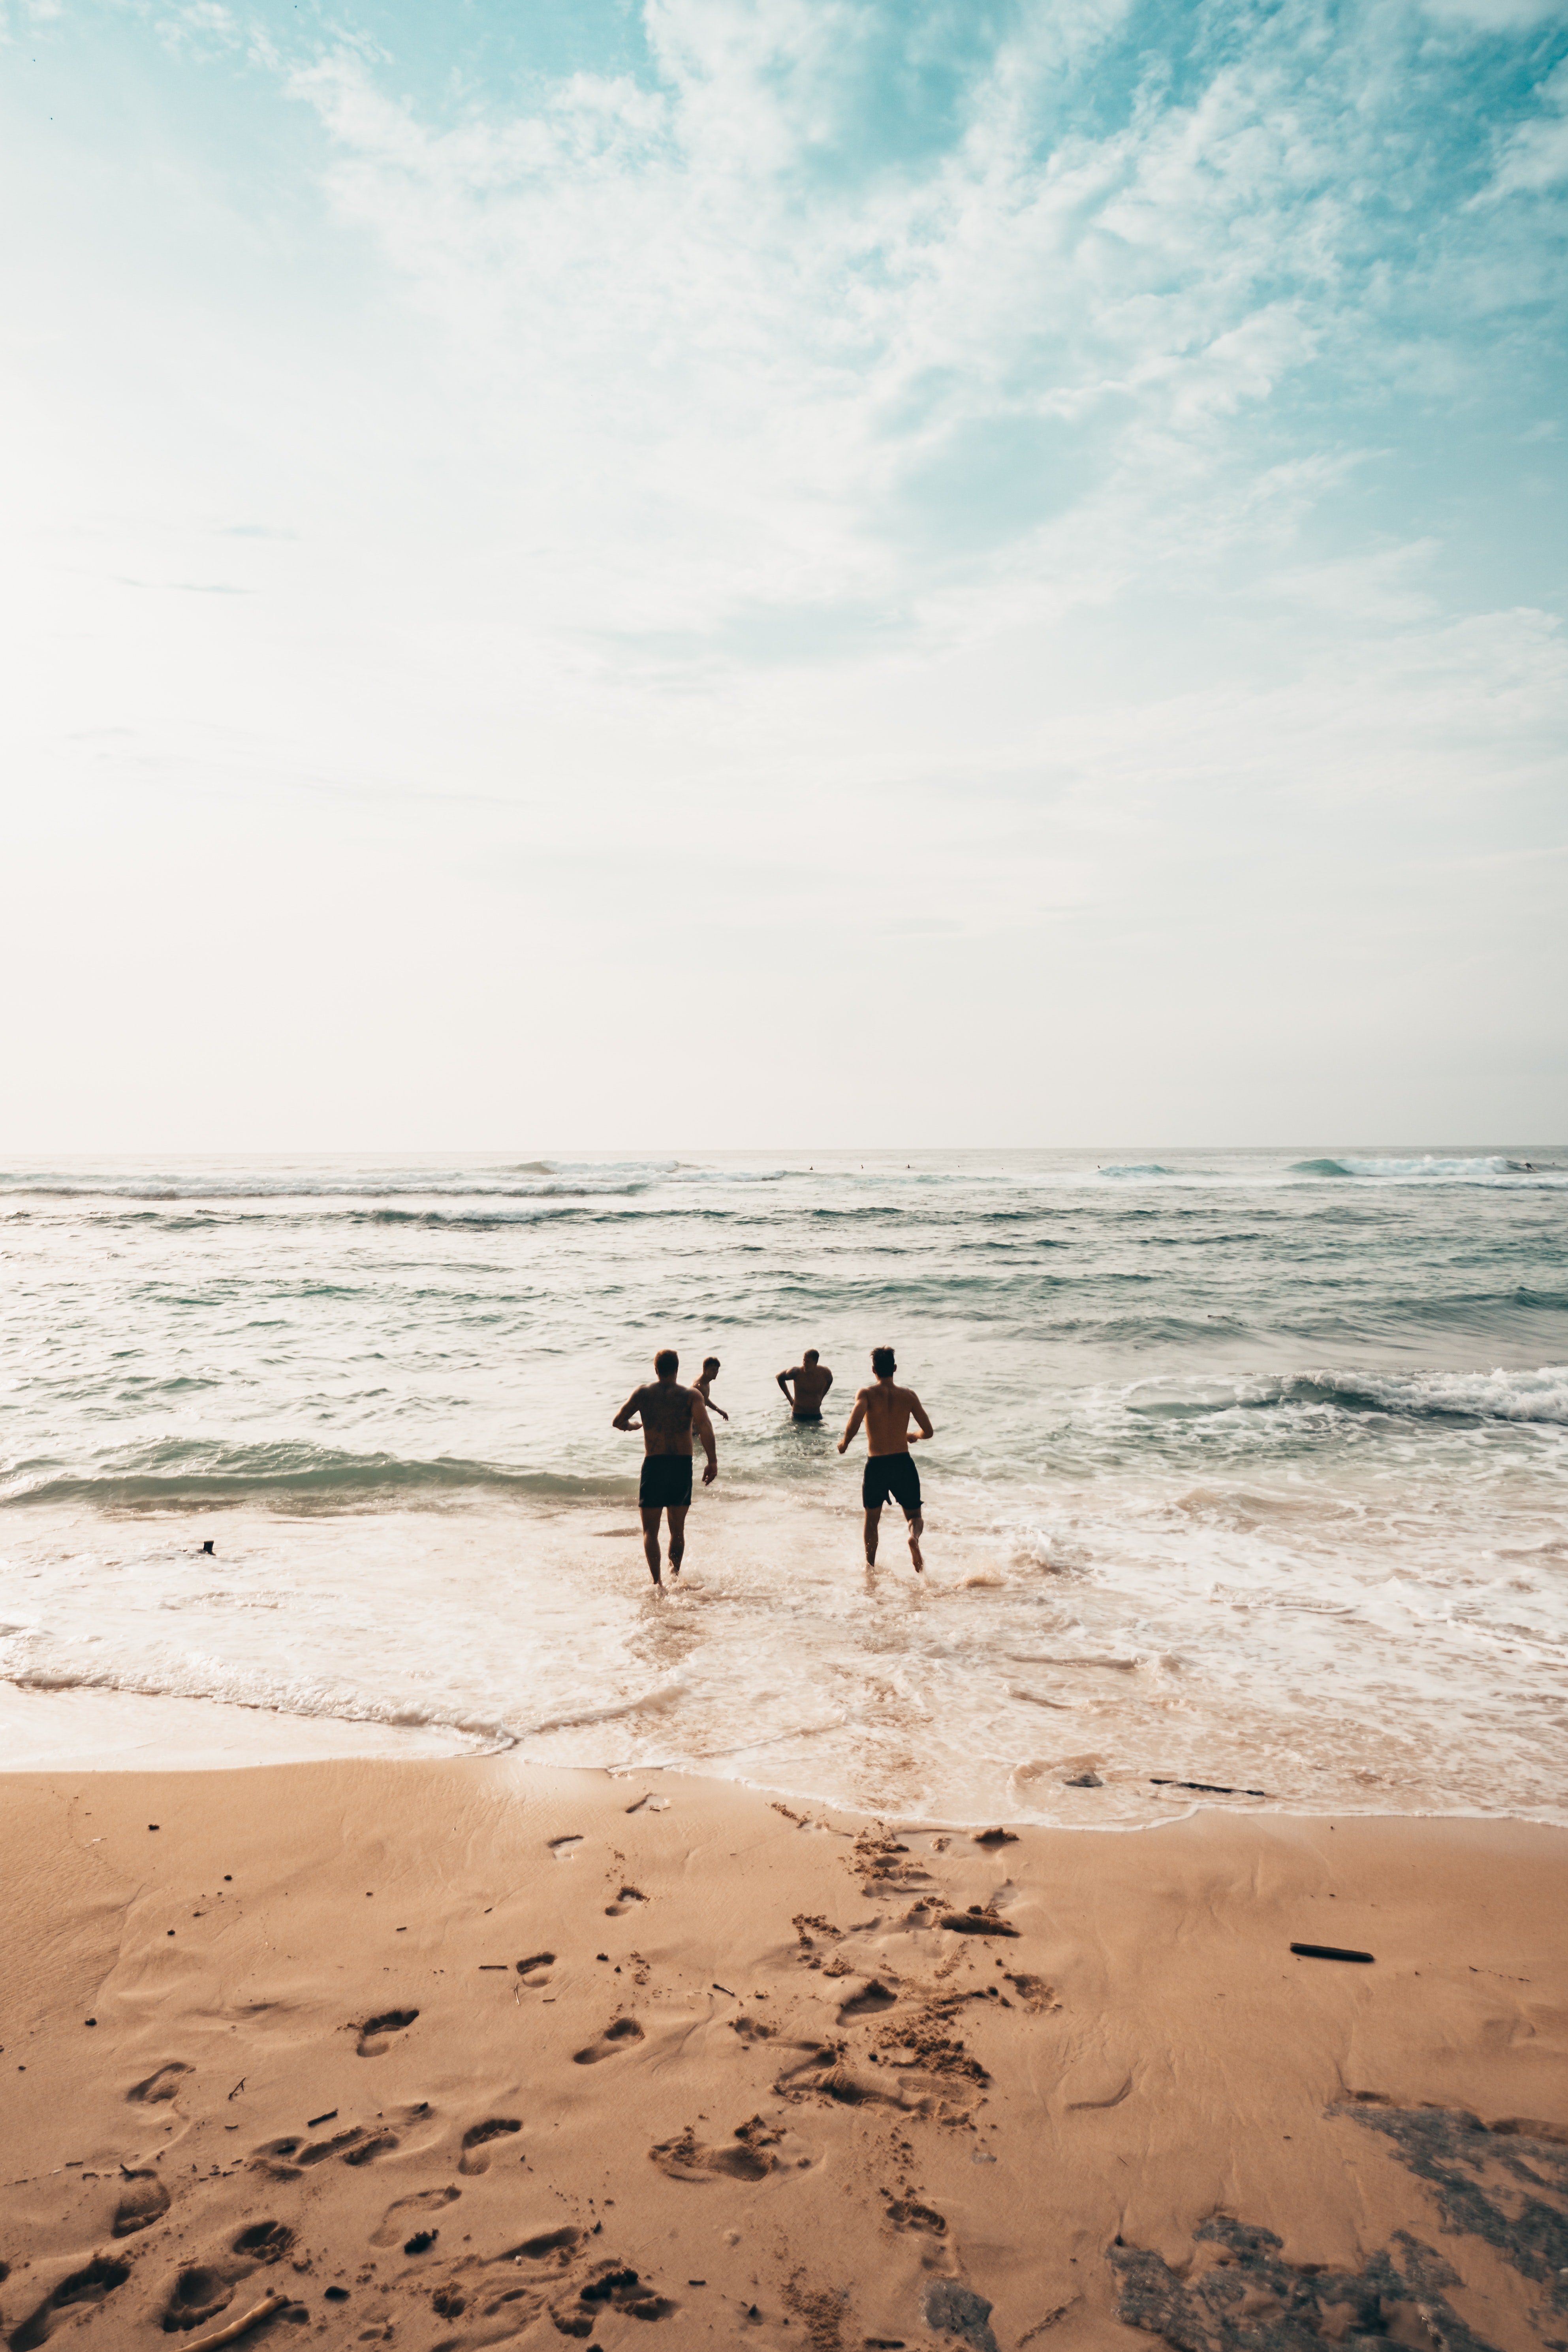 The group of friends enjoyed one last day together at the beach. | Photo: Pexels